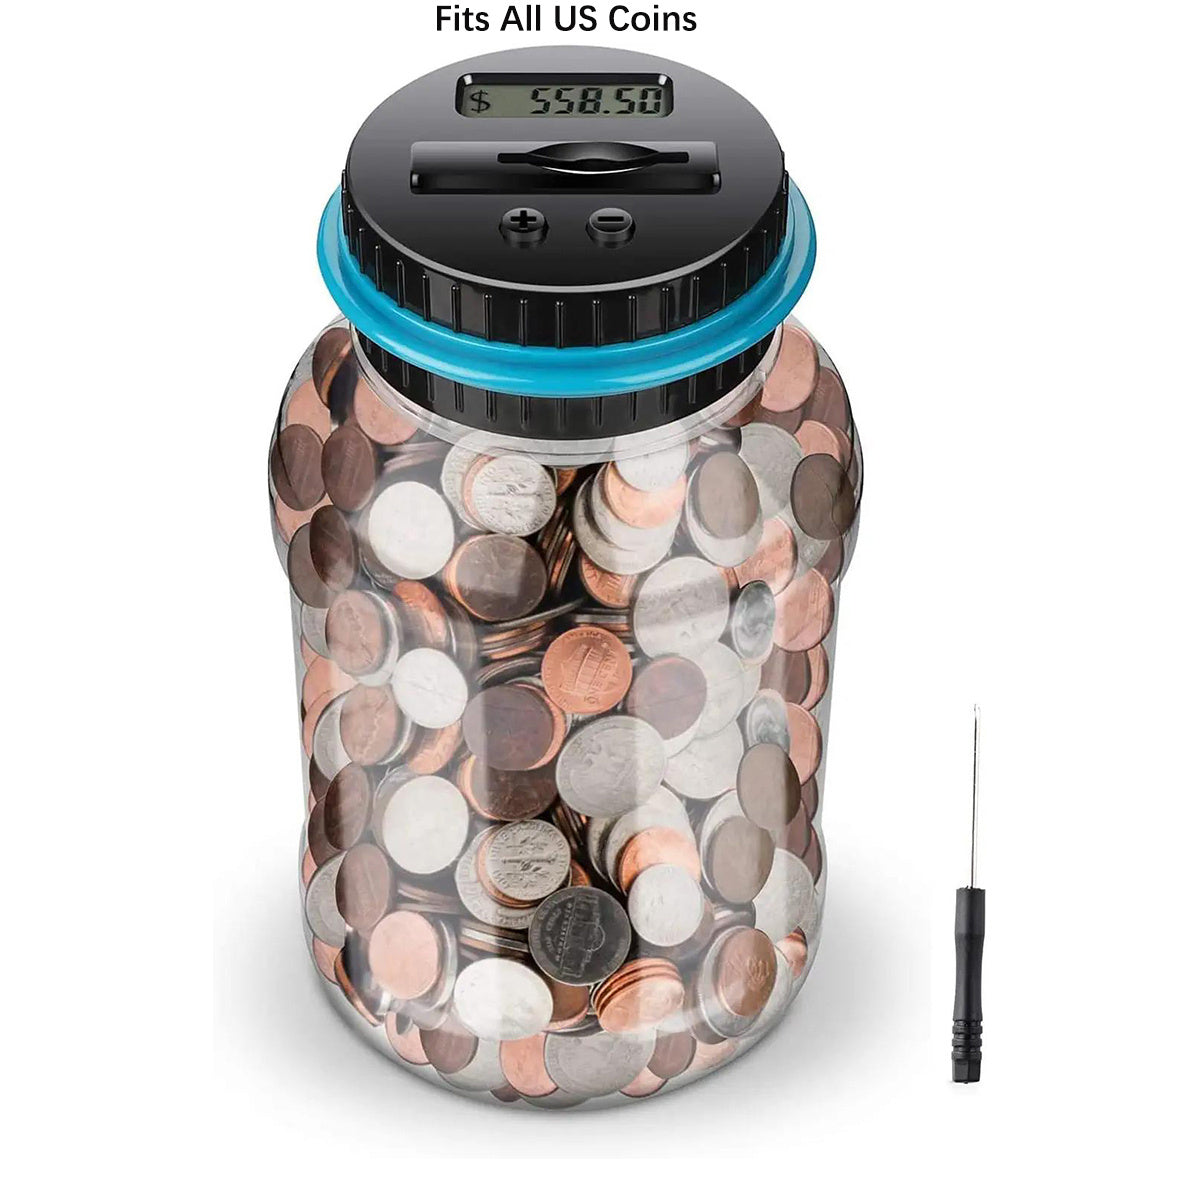 Counting Coin Digital Piggy Bank